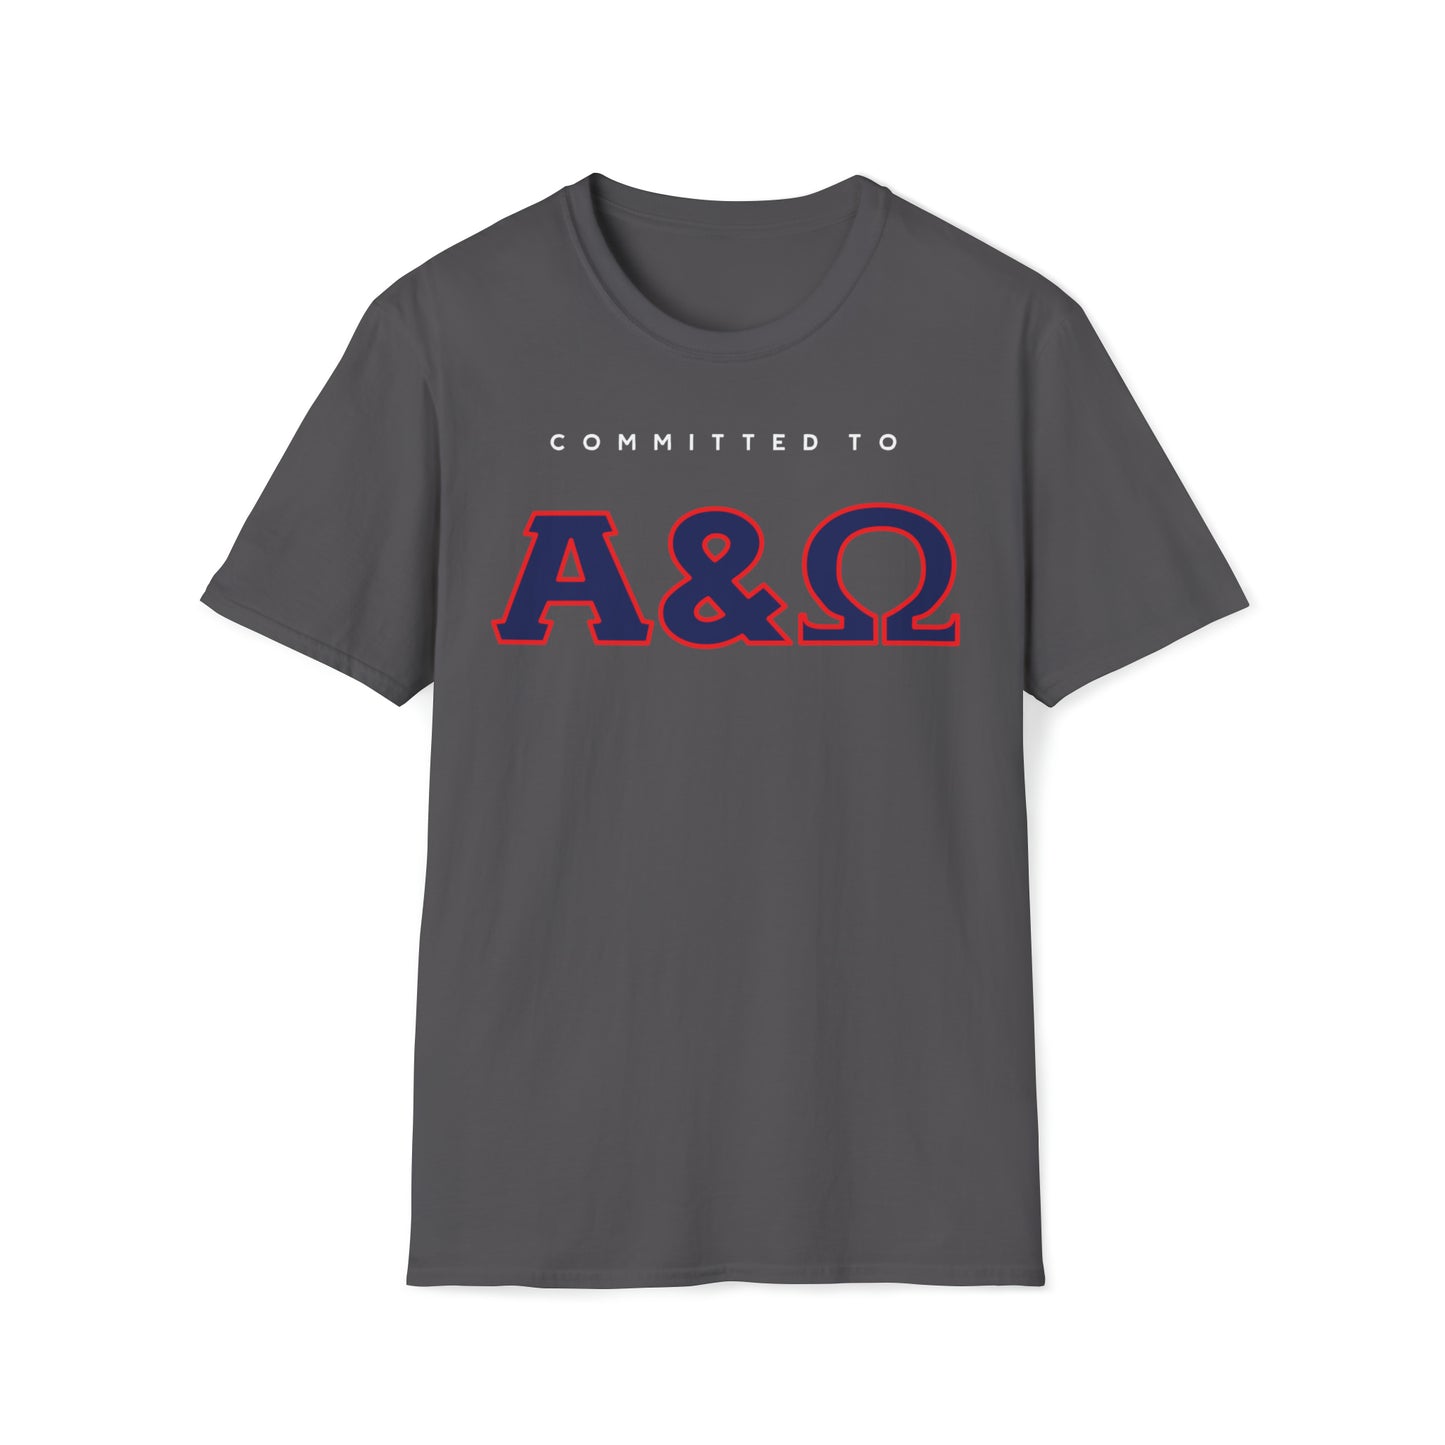 Committed to Alpha & Omega - Christian T shirt, Christian Message